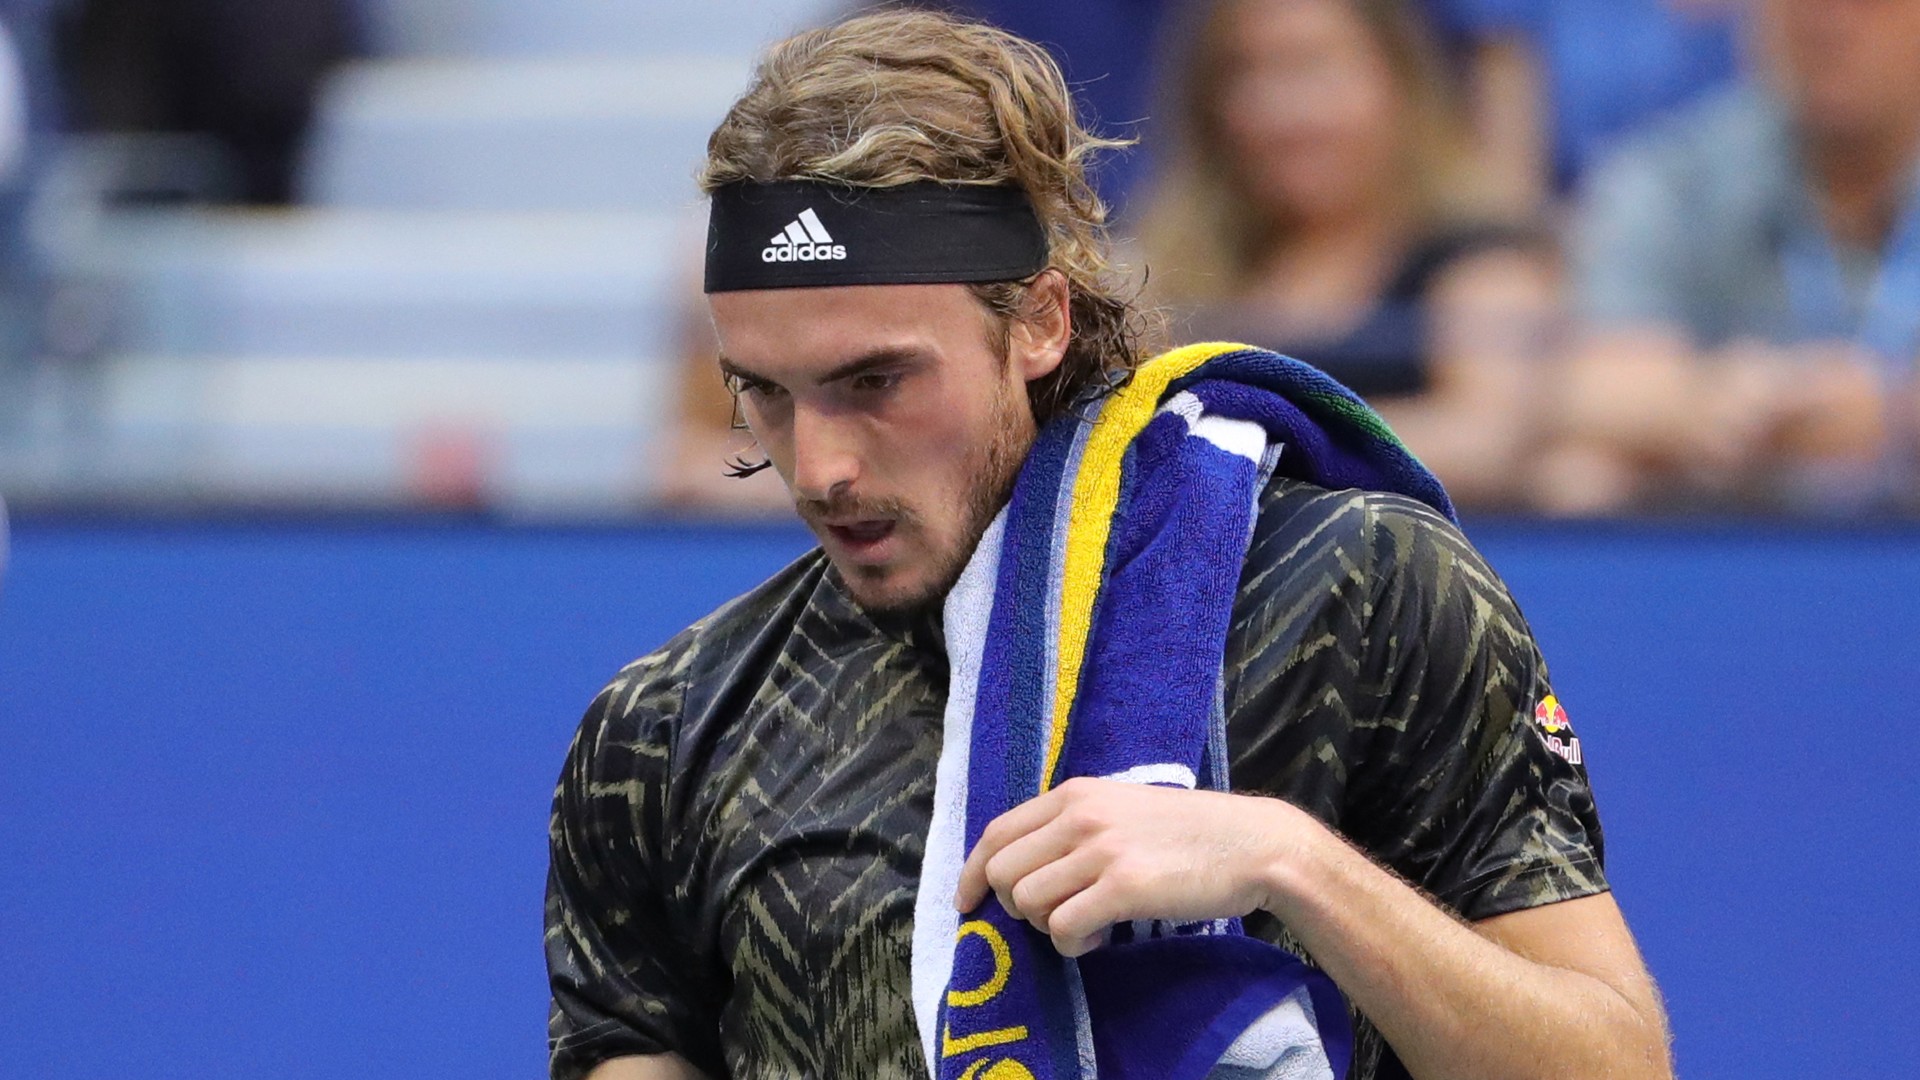 US Open: Tsitsipas appears to take aim at Zverev amid accusations after shock exit